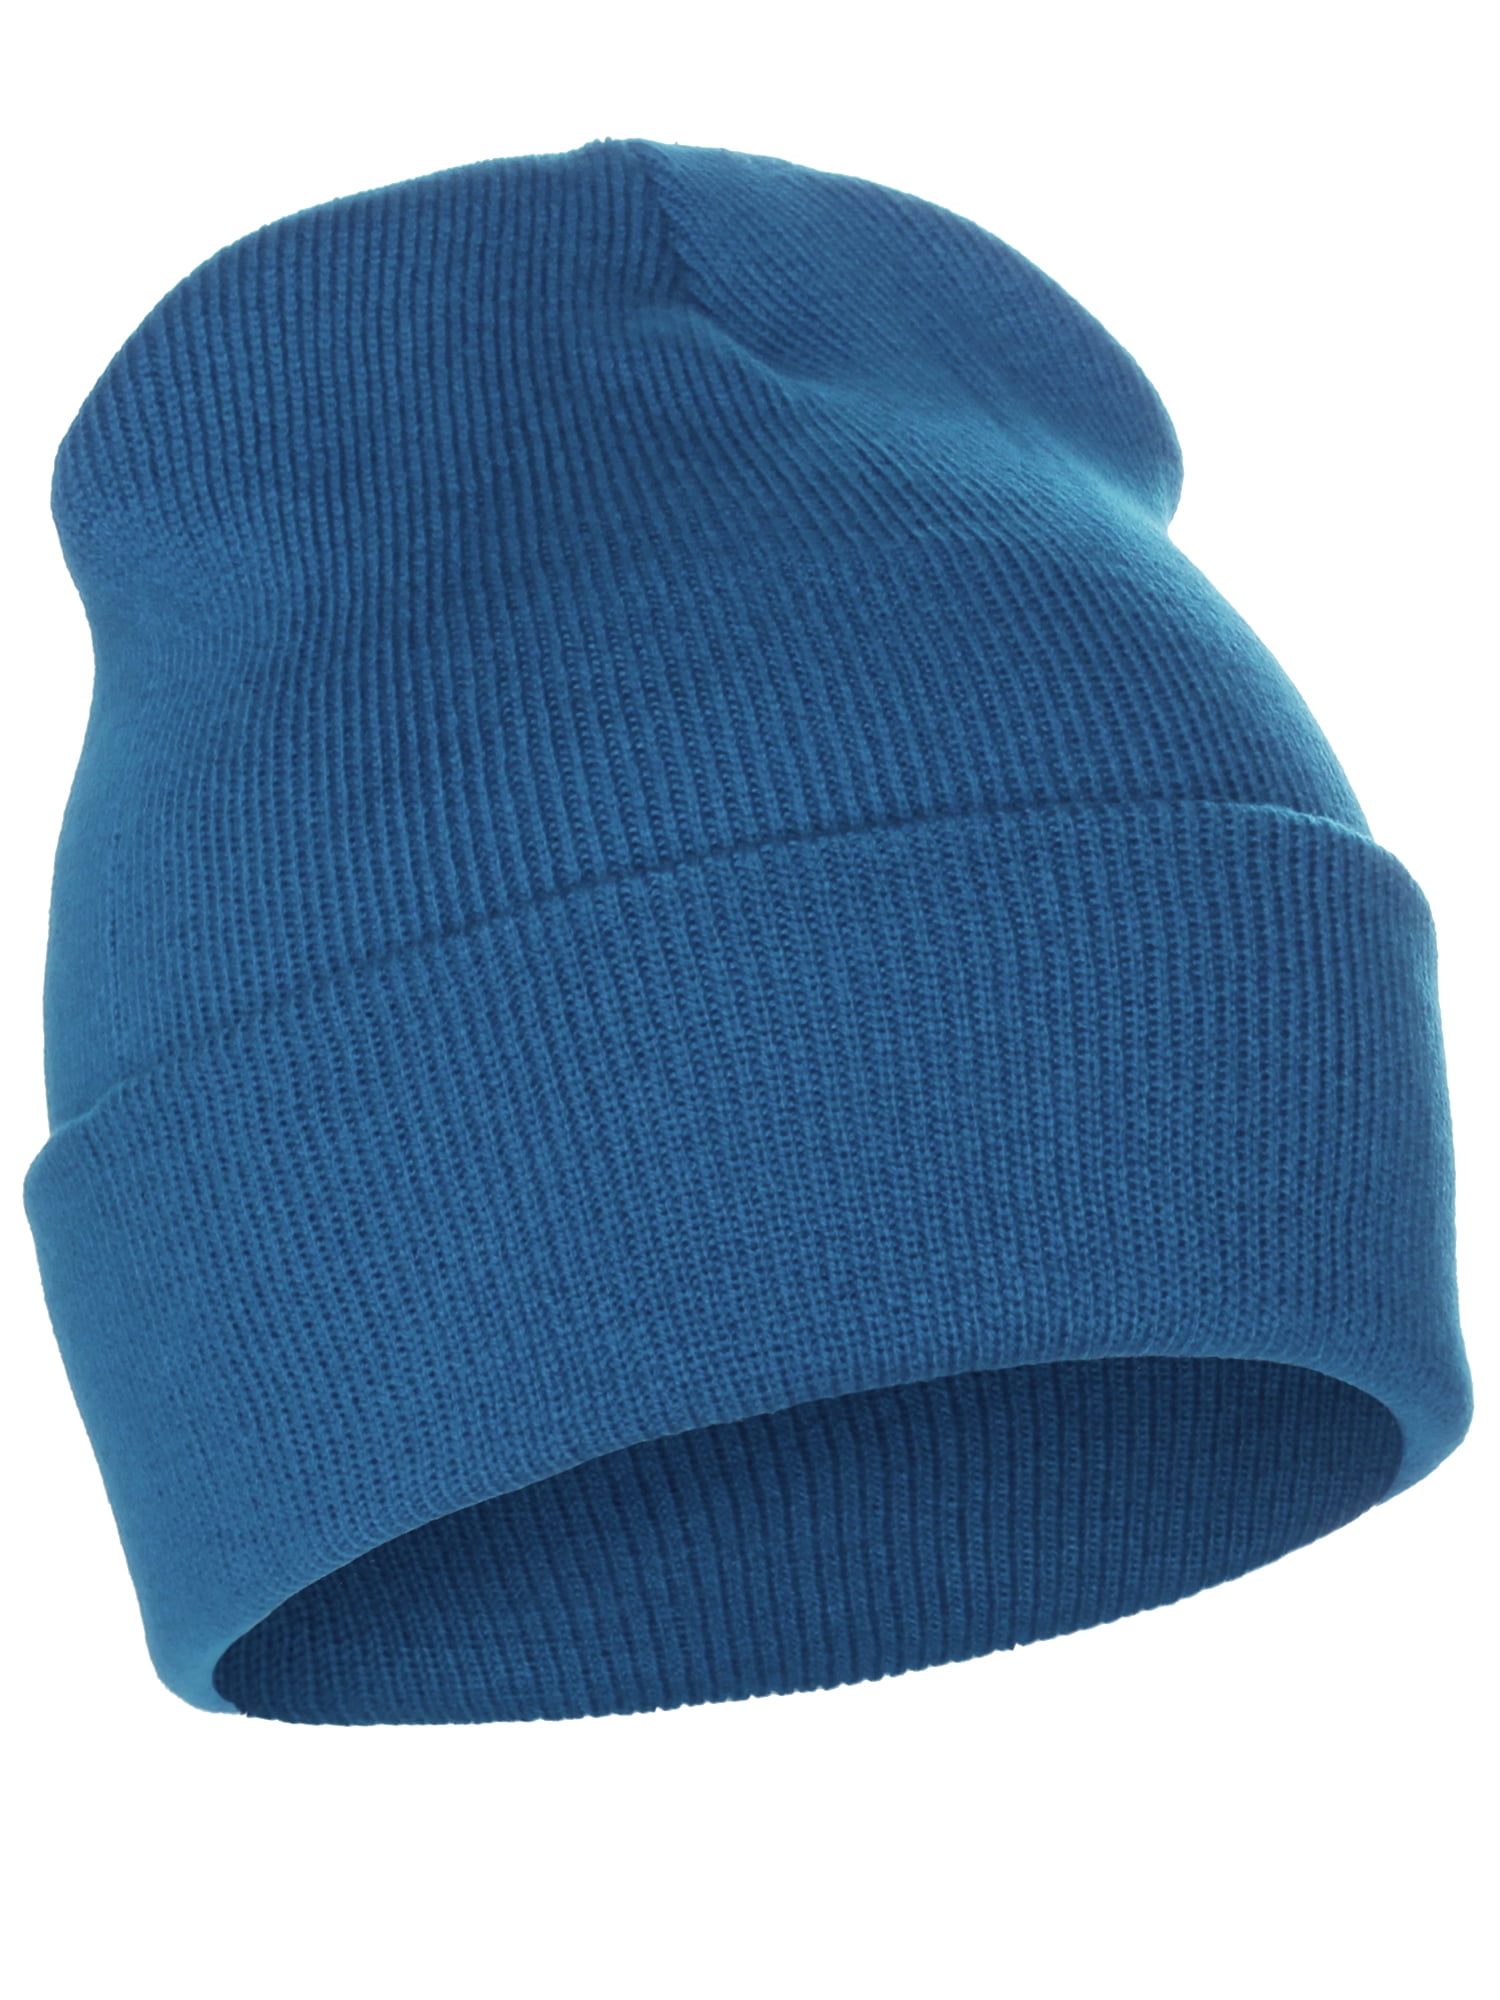 Classic Plain Cuffed Beanie Winter Knit Hat Skully Cap, Turquoise